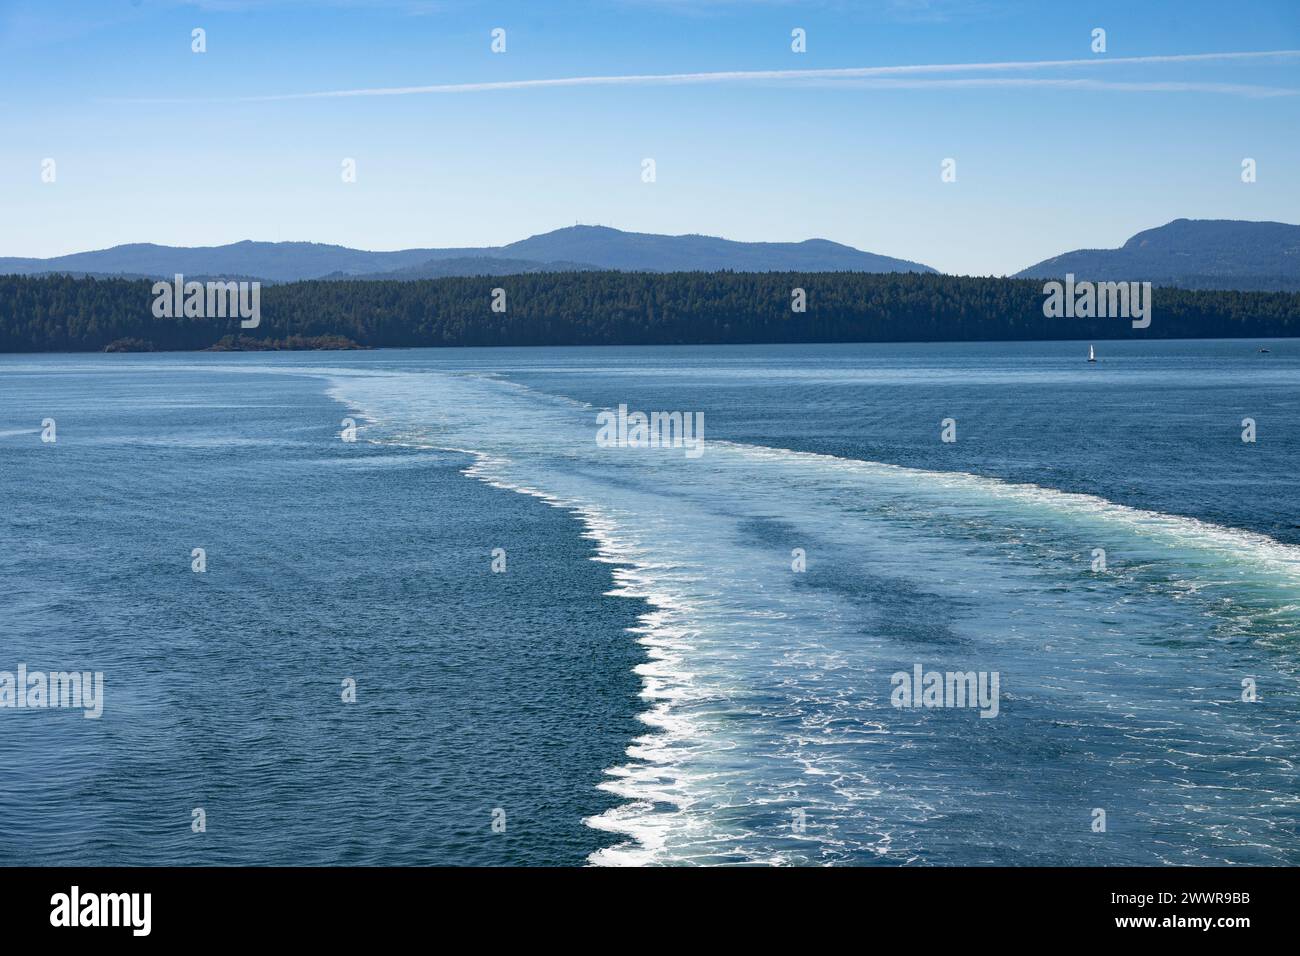 The wake of ocean water flowing behind the ferry boat, Strait of Georgia, British Columbia, Canada Stock Photo